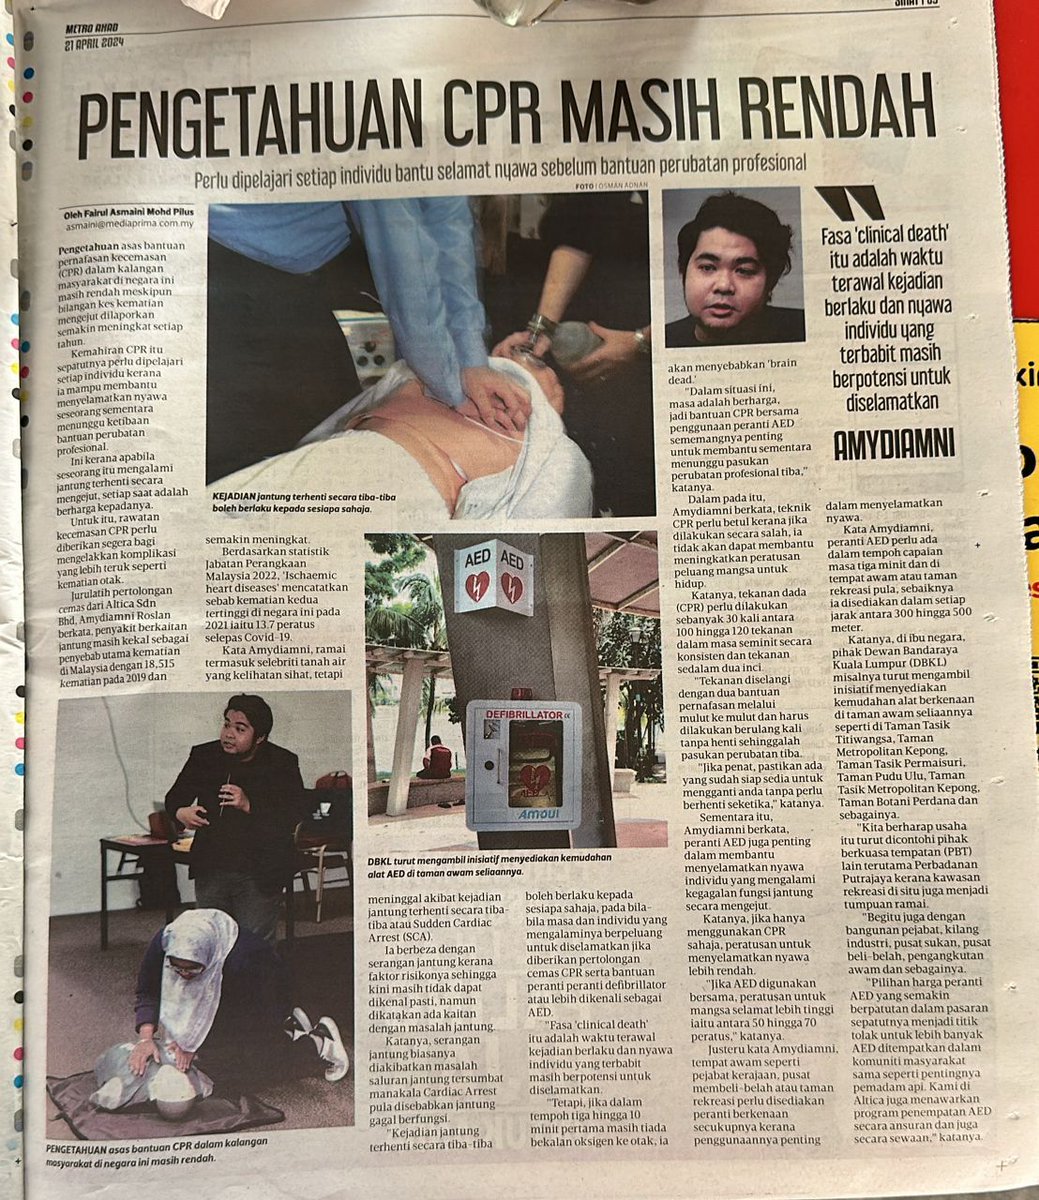 The Malaysian daily newspaper Harian Metro has reported on the issue of inadequate knowledge of CPR and emphasized the significance of providing #CPR training and the availability of #AEDs in public areas. 🫶

Pengetahuan CPR masih rendah | @hmetromy  hmetro.com.my/sihat/2024/04/…